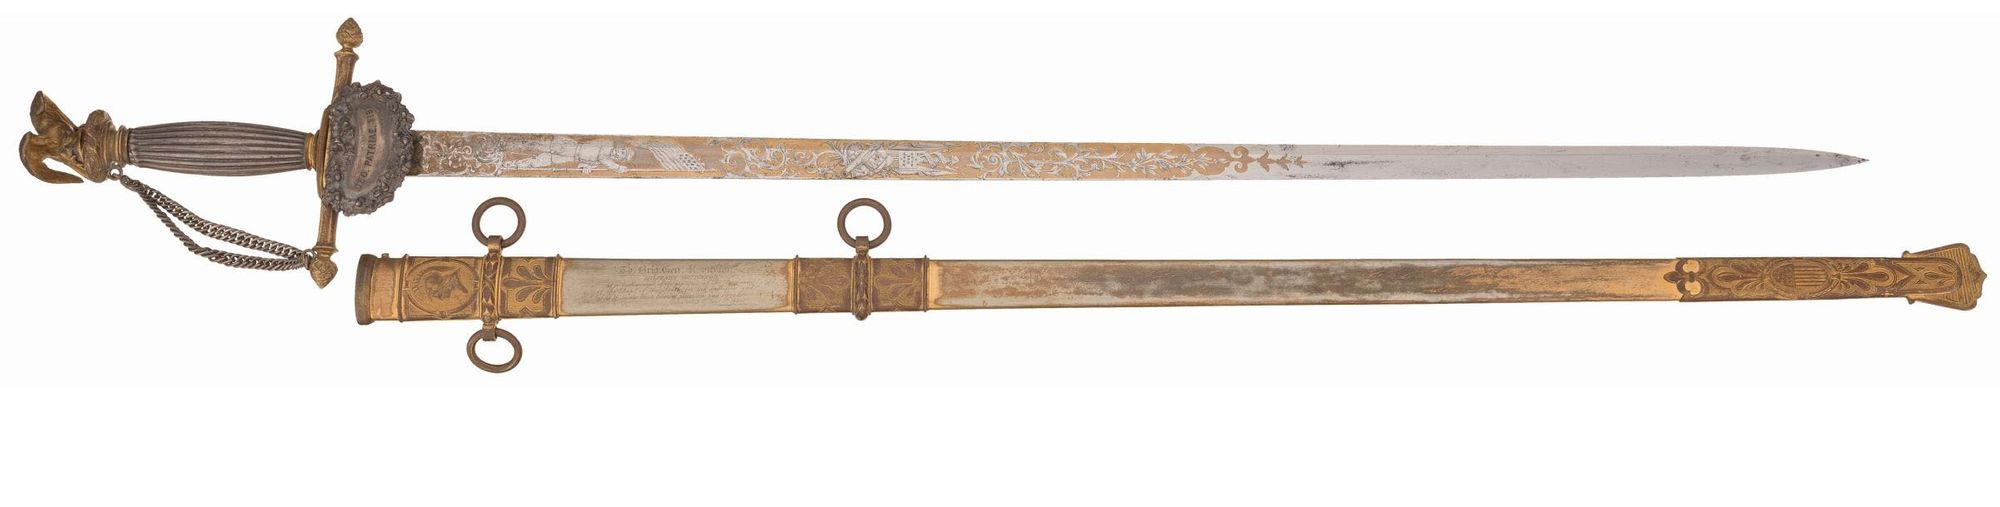 Tiffany Officer's Sword and Scabbard Presented to Gen. Saxton